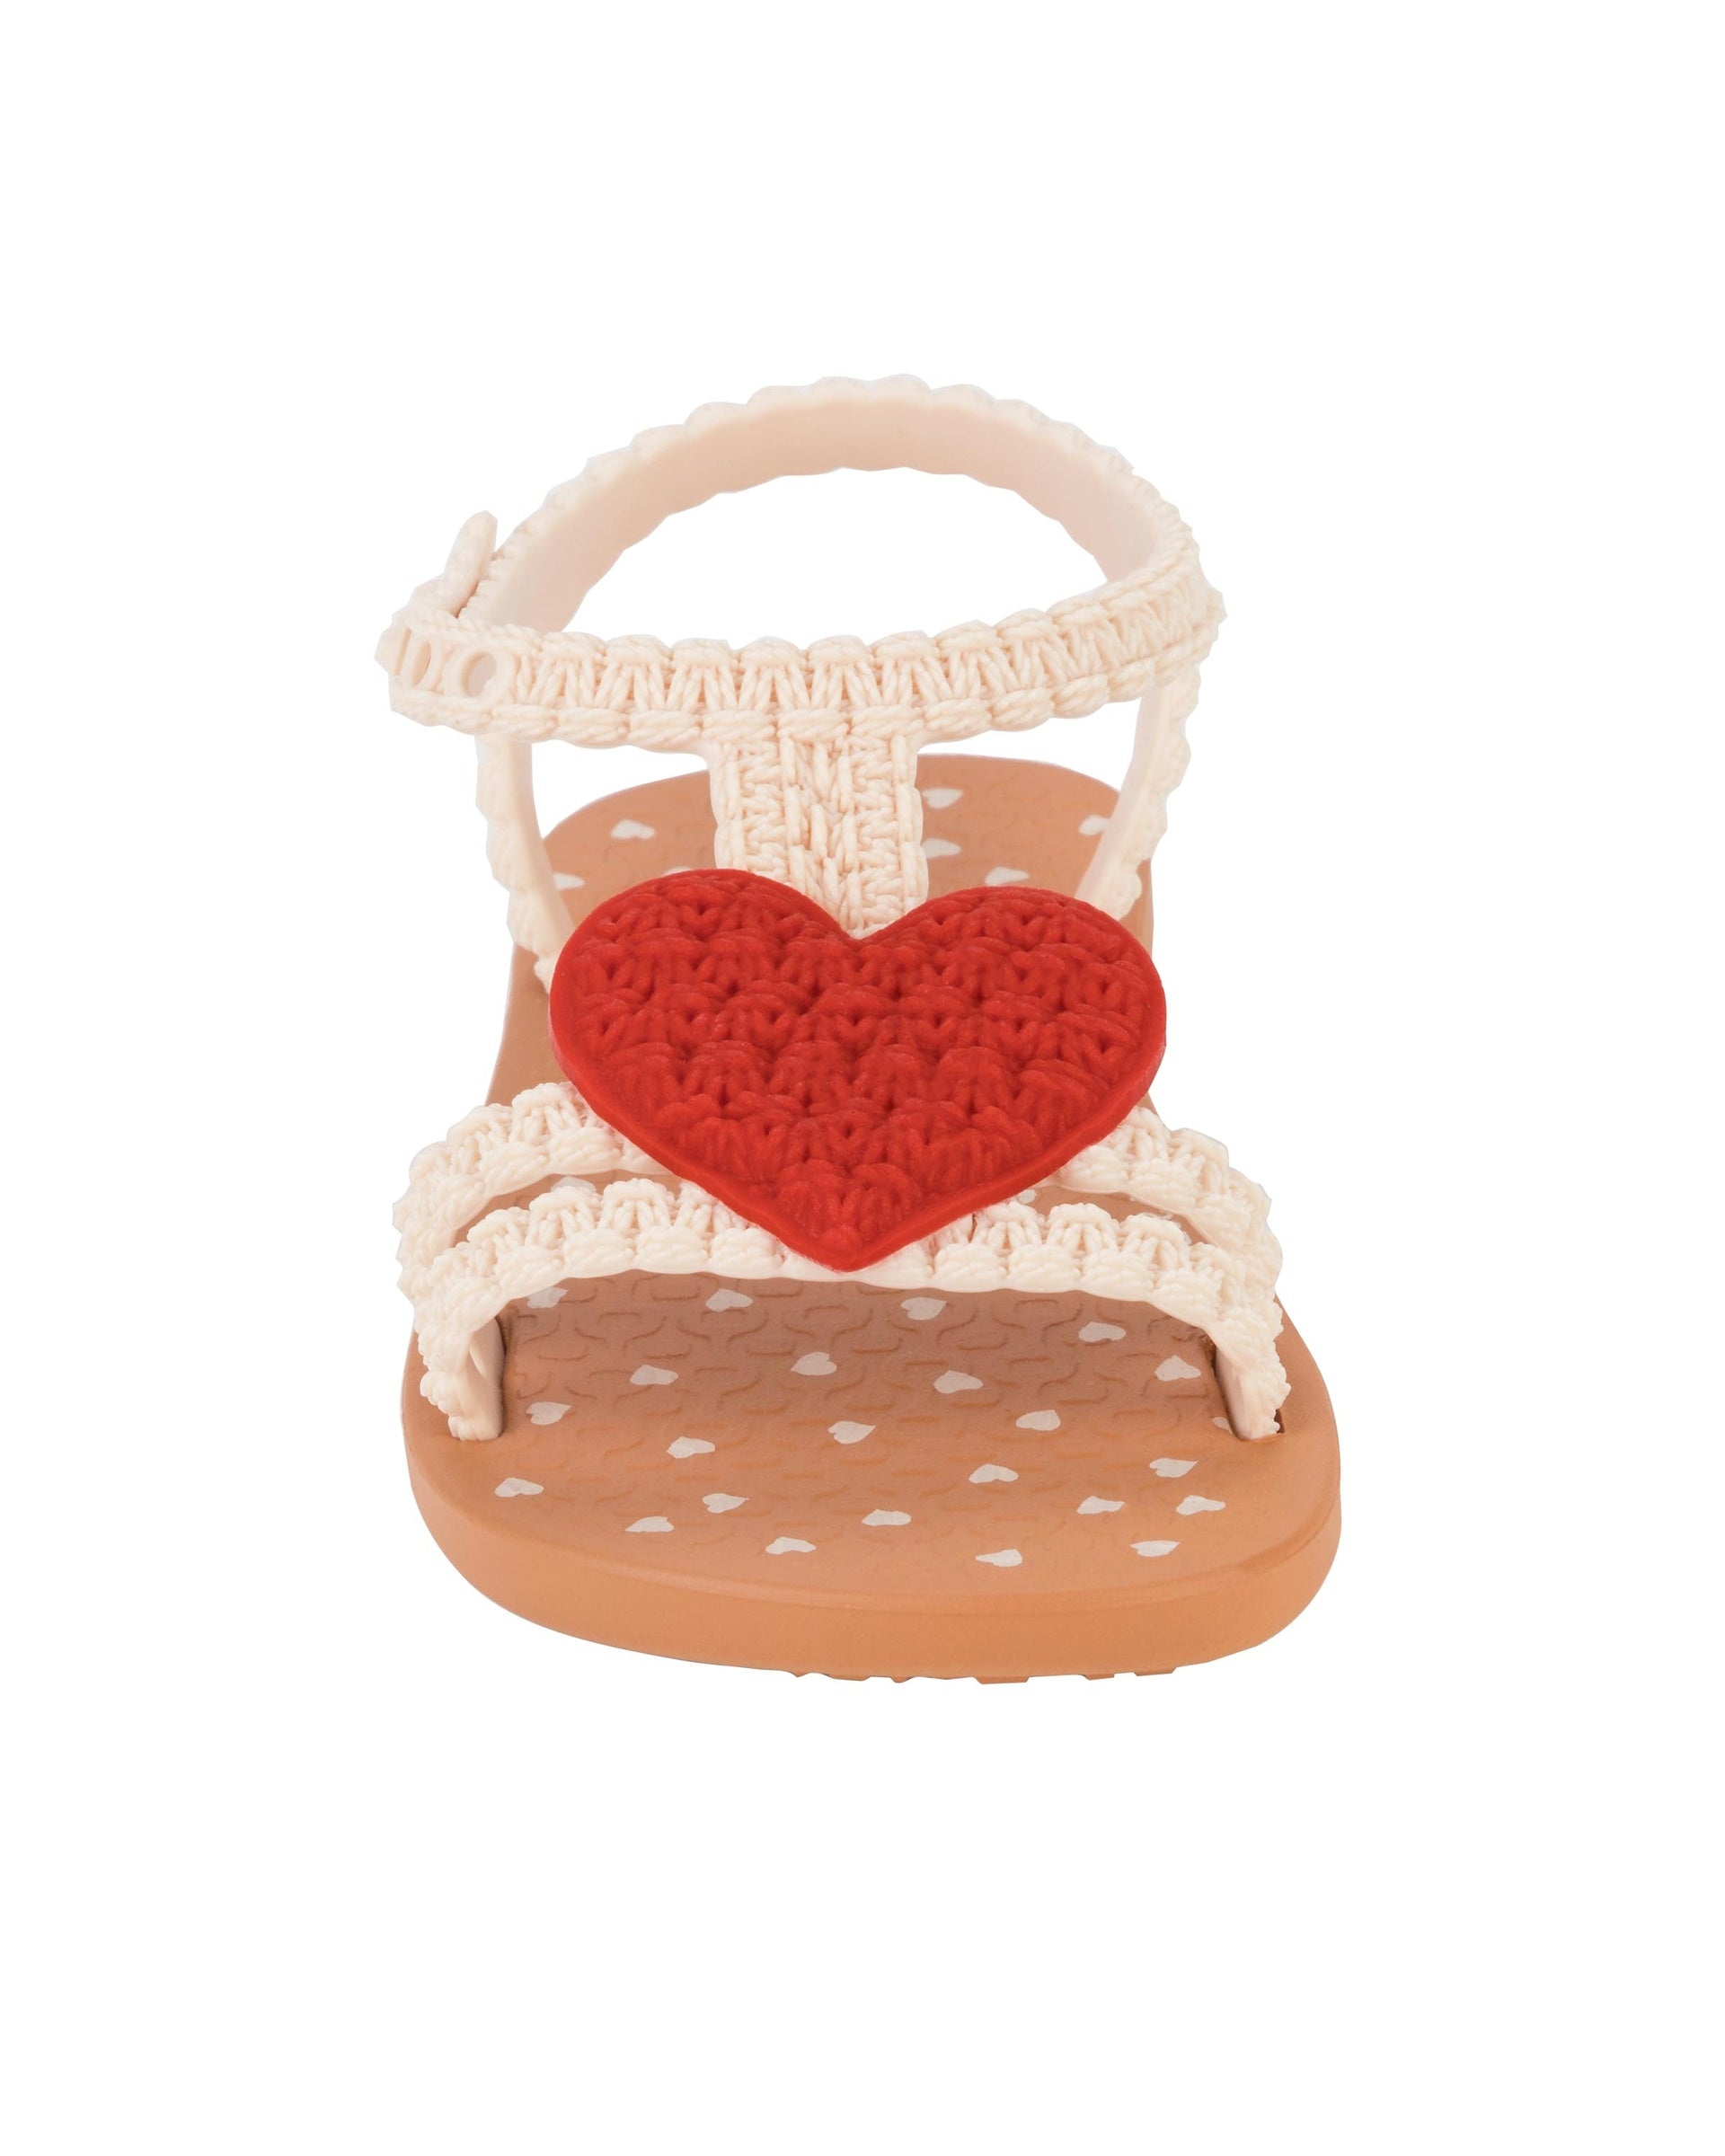 Front view of a beige Ipanema My First Ipanema baby sandal with red heart on top and crochet texture .